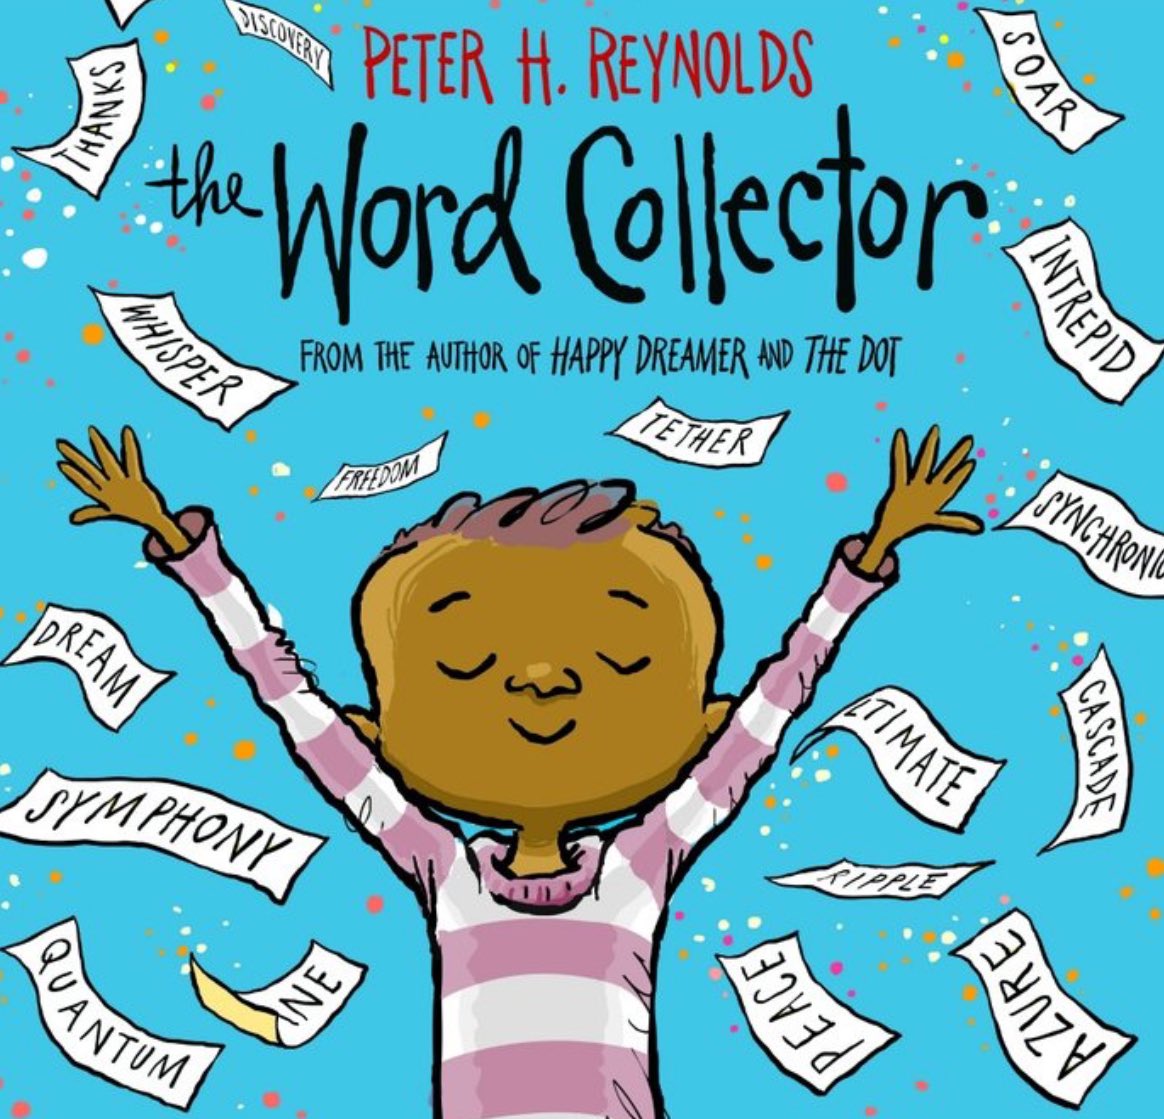 I just found out that my book THE WORD COLLECTOR is the #2 best selling in my collection. Can you guess which one is my number one bestselling book? Answer: bit.ly/Peters1Book